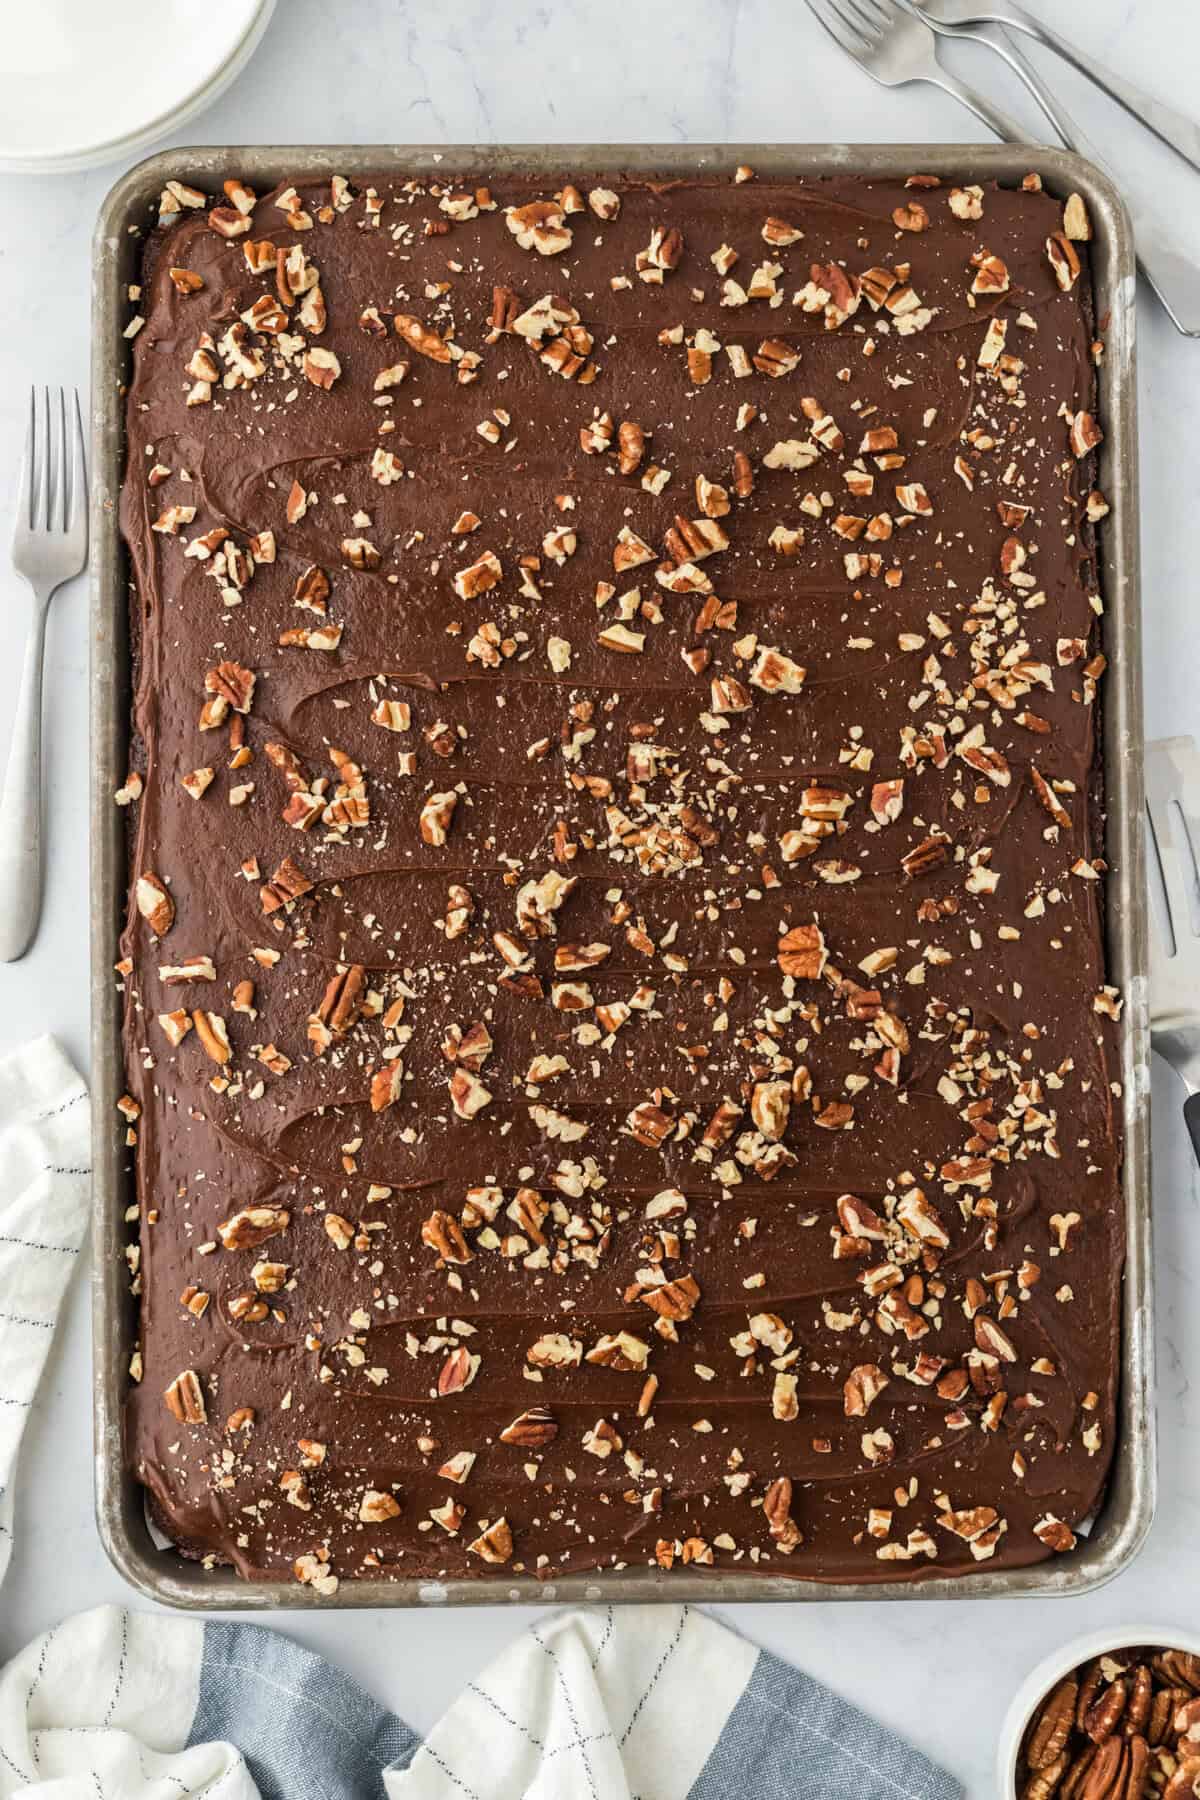 A Texas chocolate sheet cake with pecans on top against a white background with a napkin